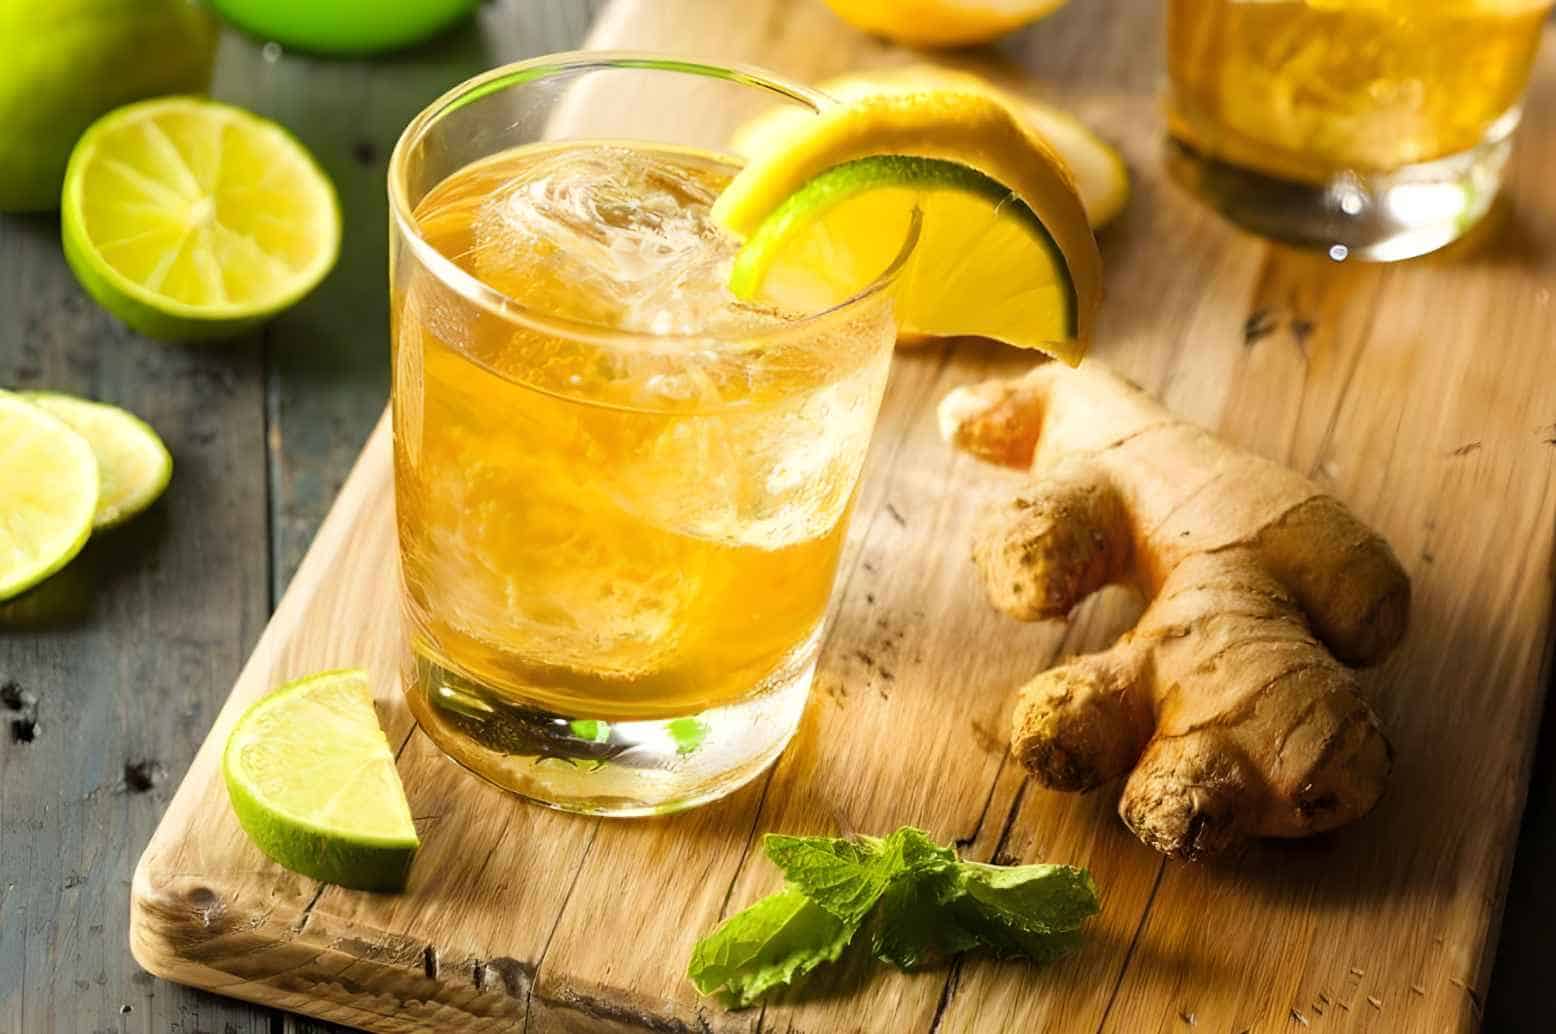 Introducing The Ginger Beer What Kind Of Drink Is This